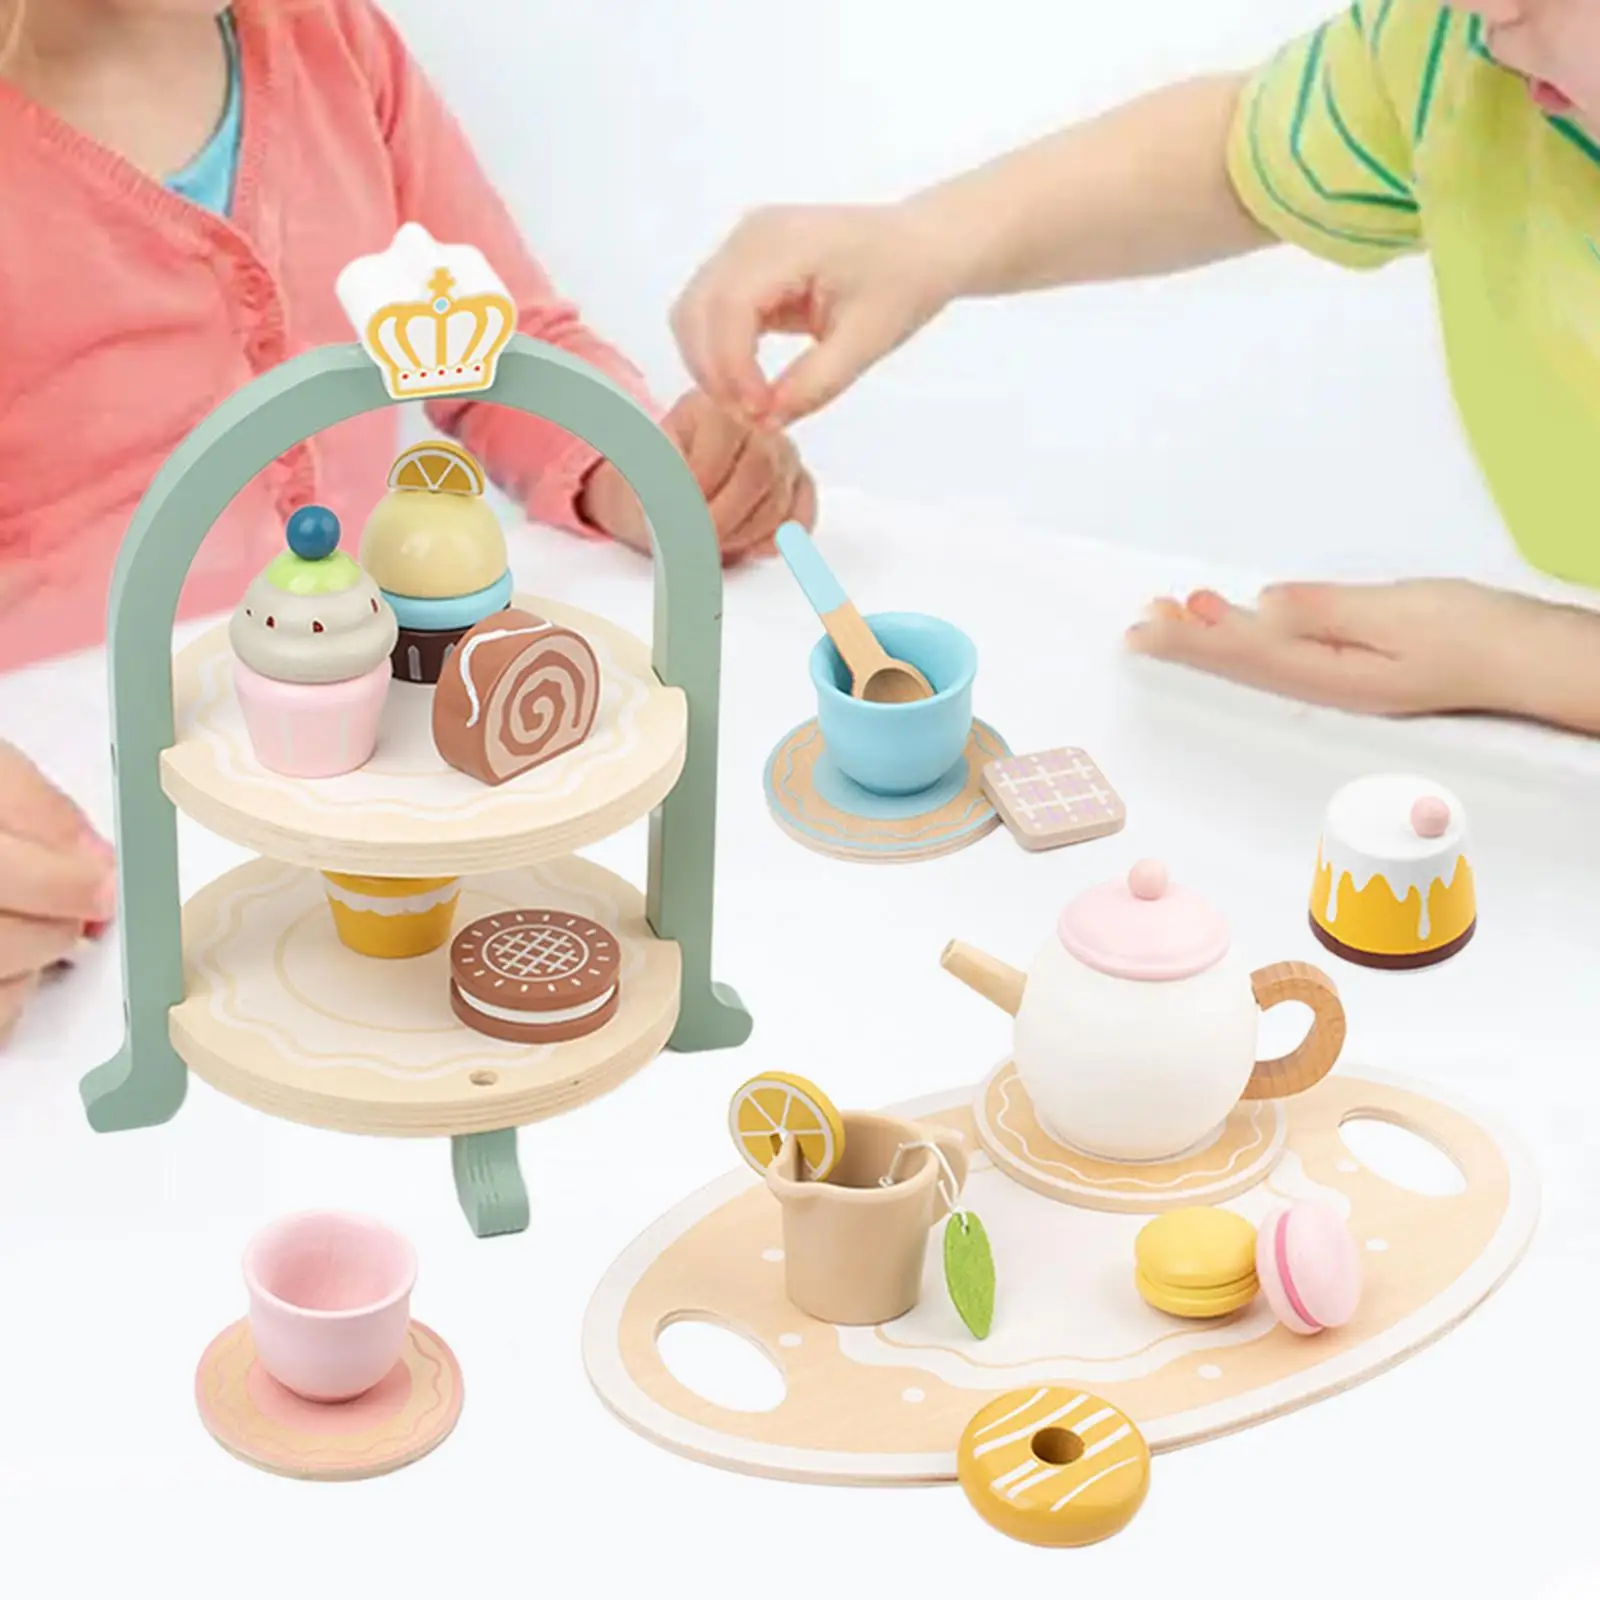 Kids Afternoon Tea Toy, Food Play Toys for Toddlers, Montessori Wooden Dessert